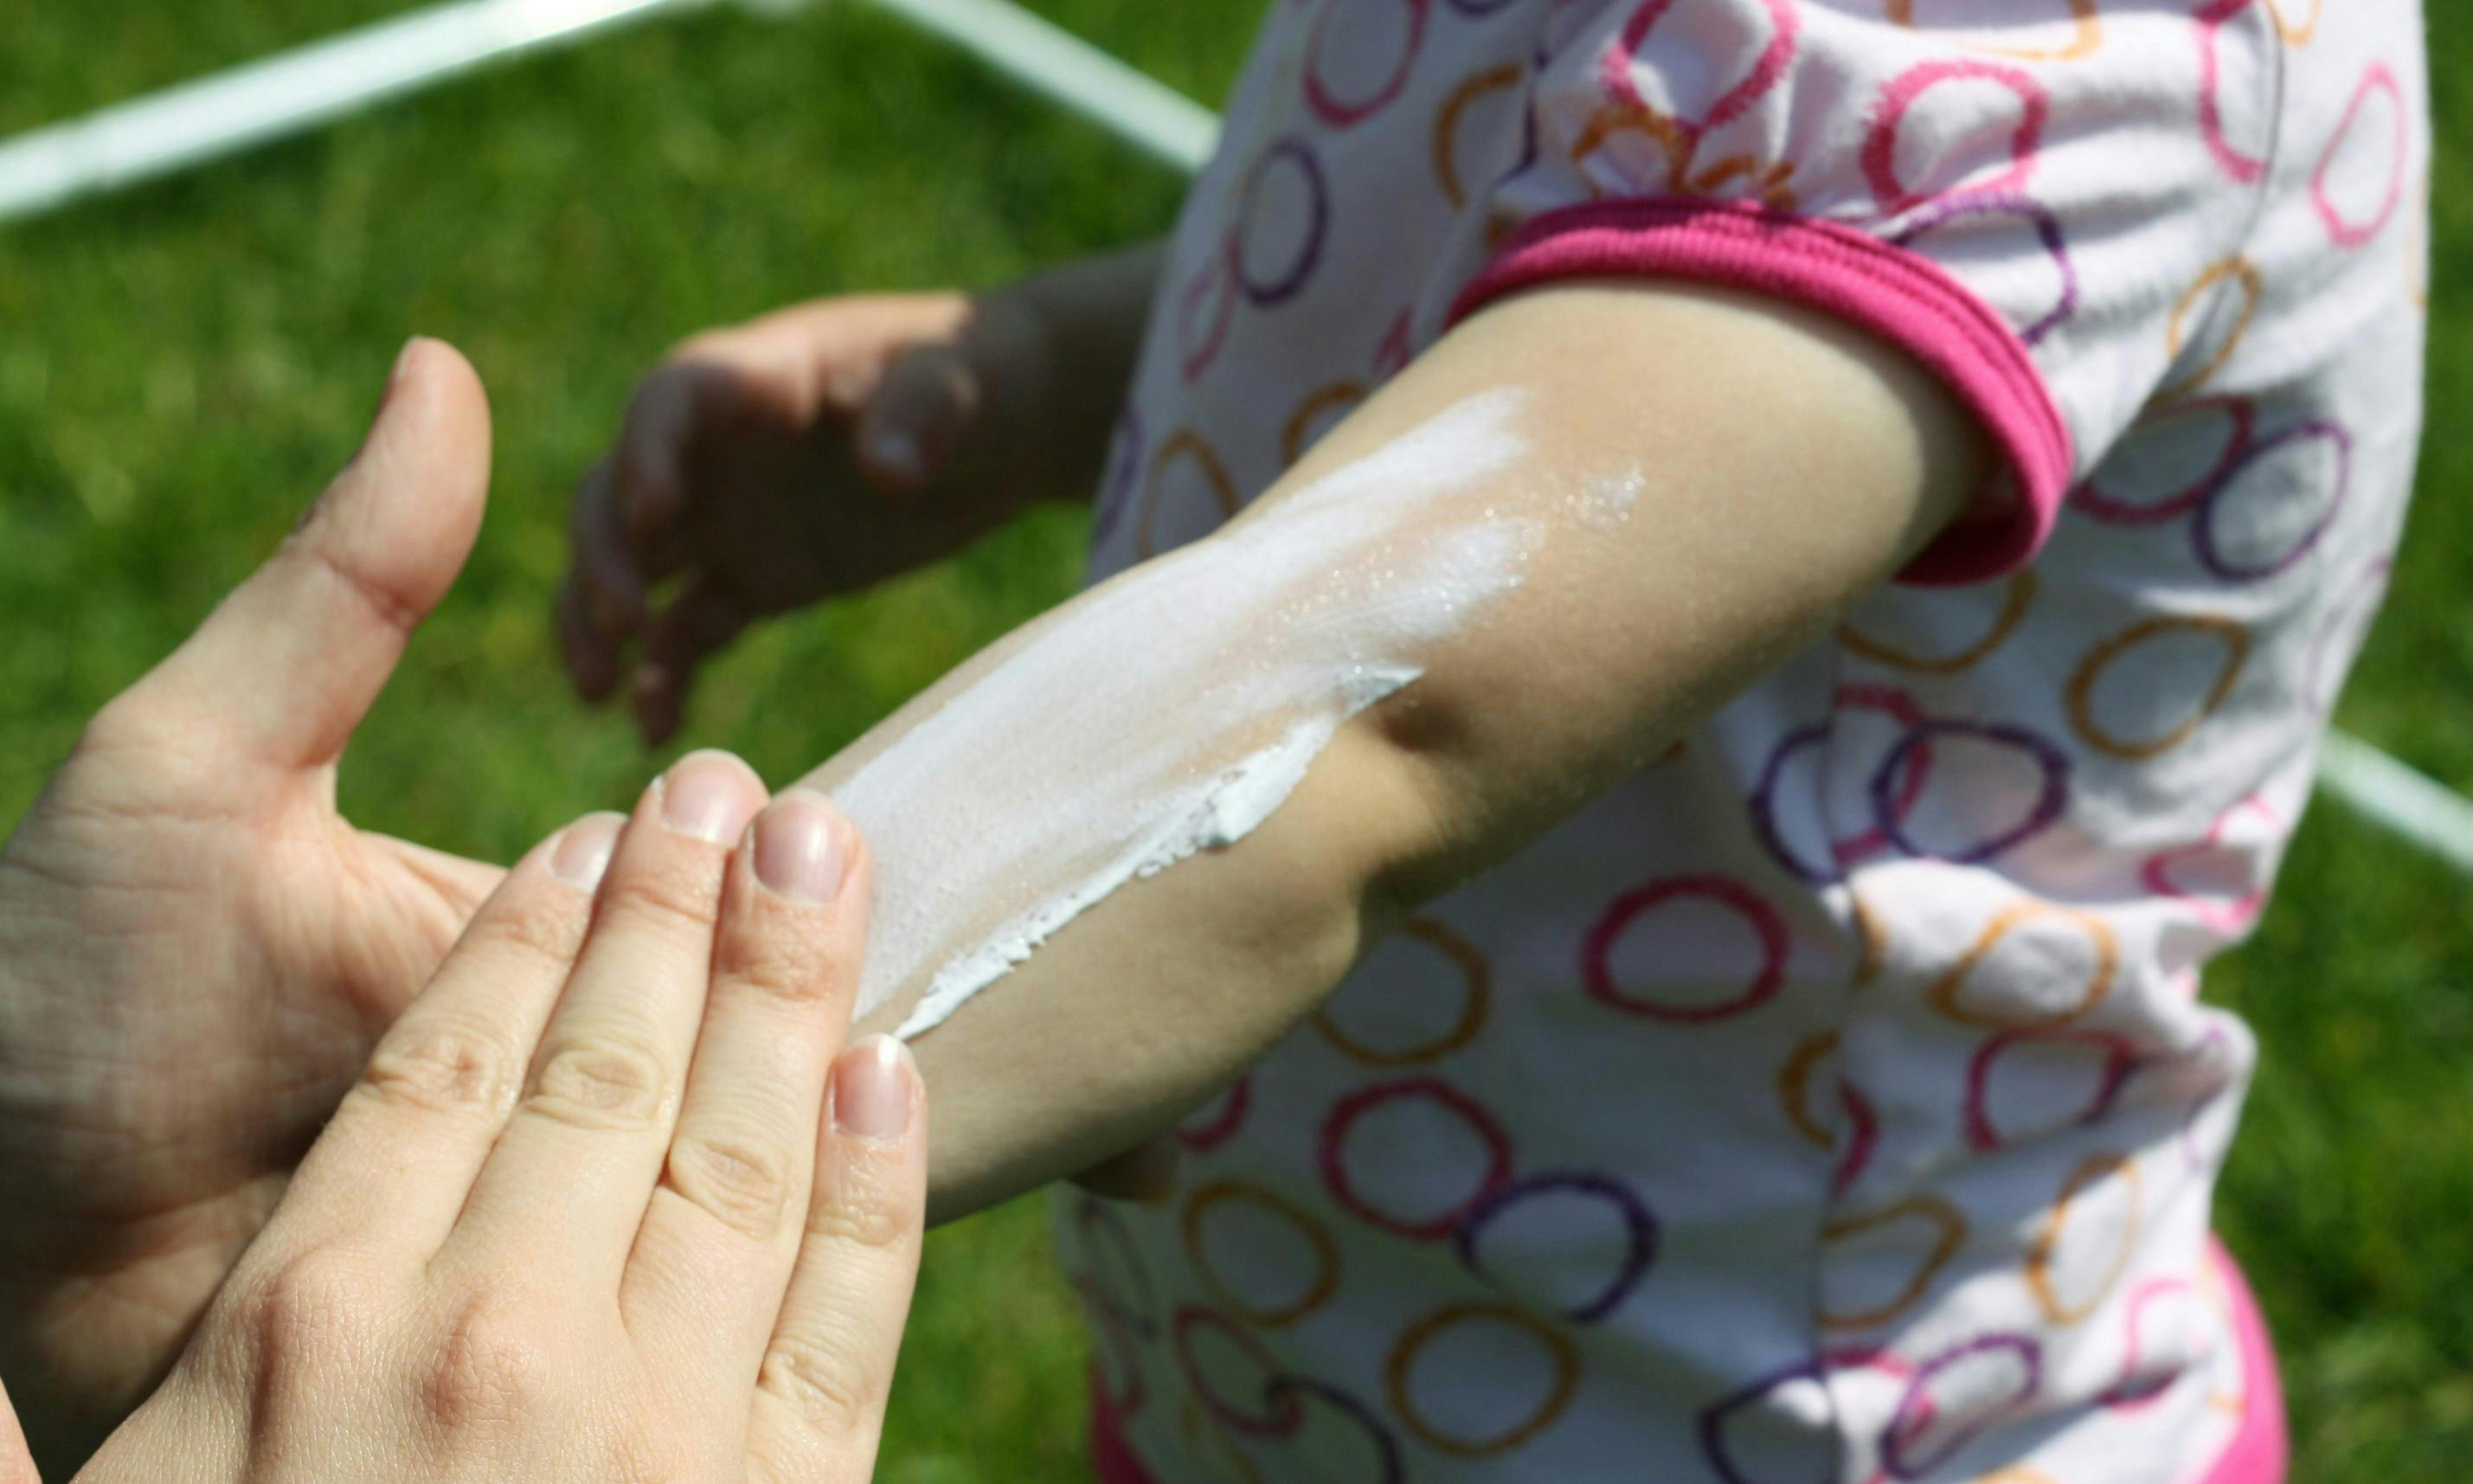 Adult applying sunscreen to a child's arm